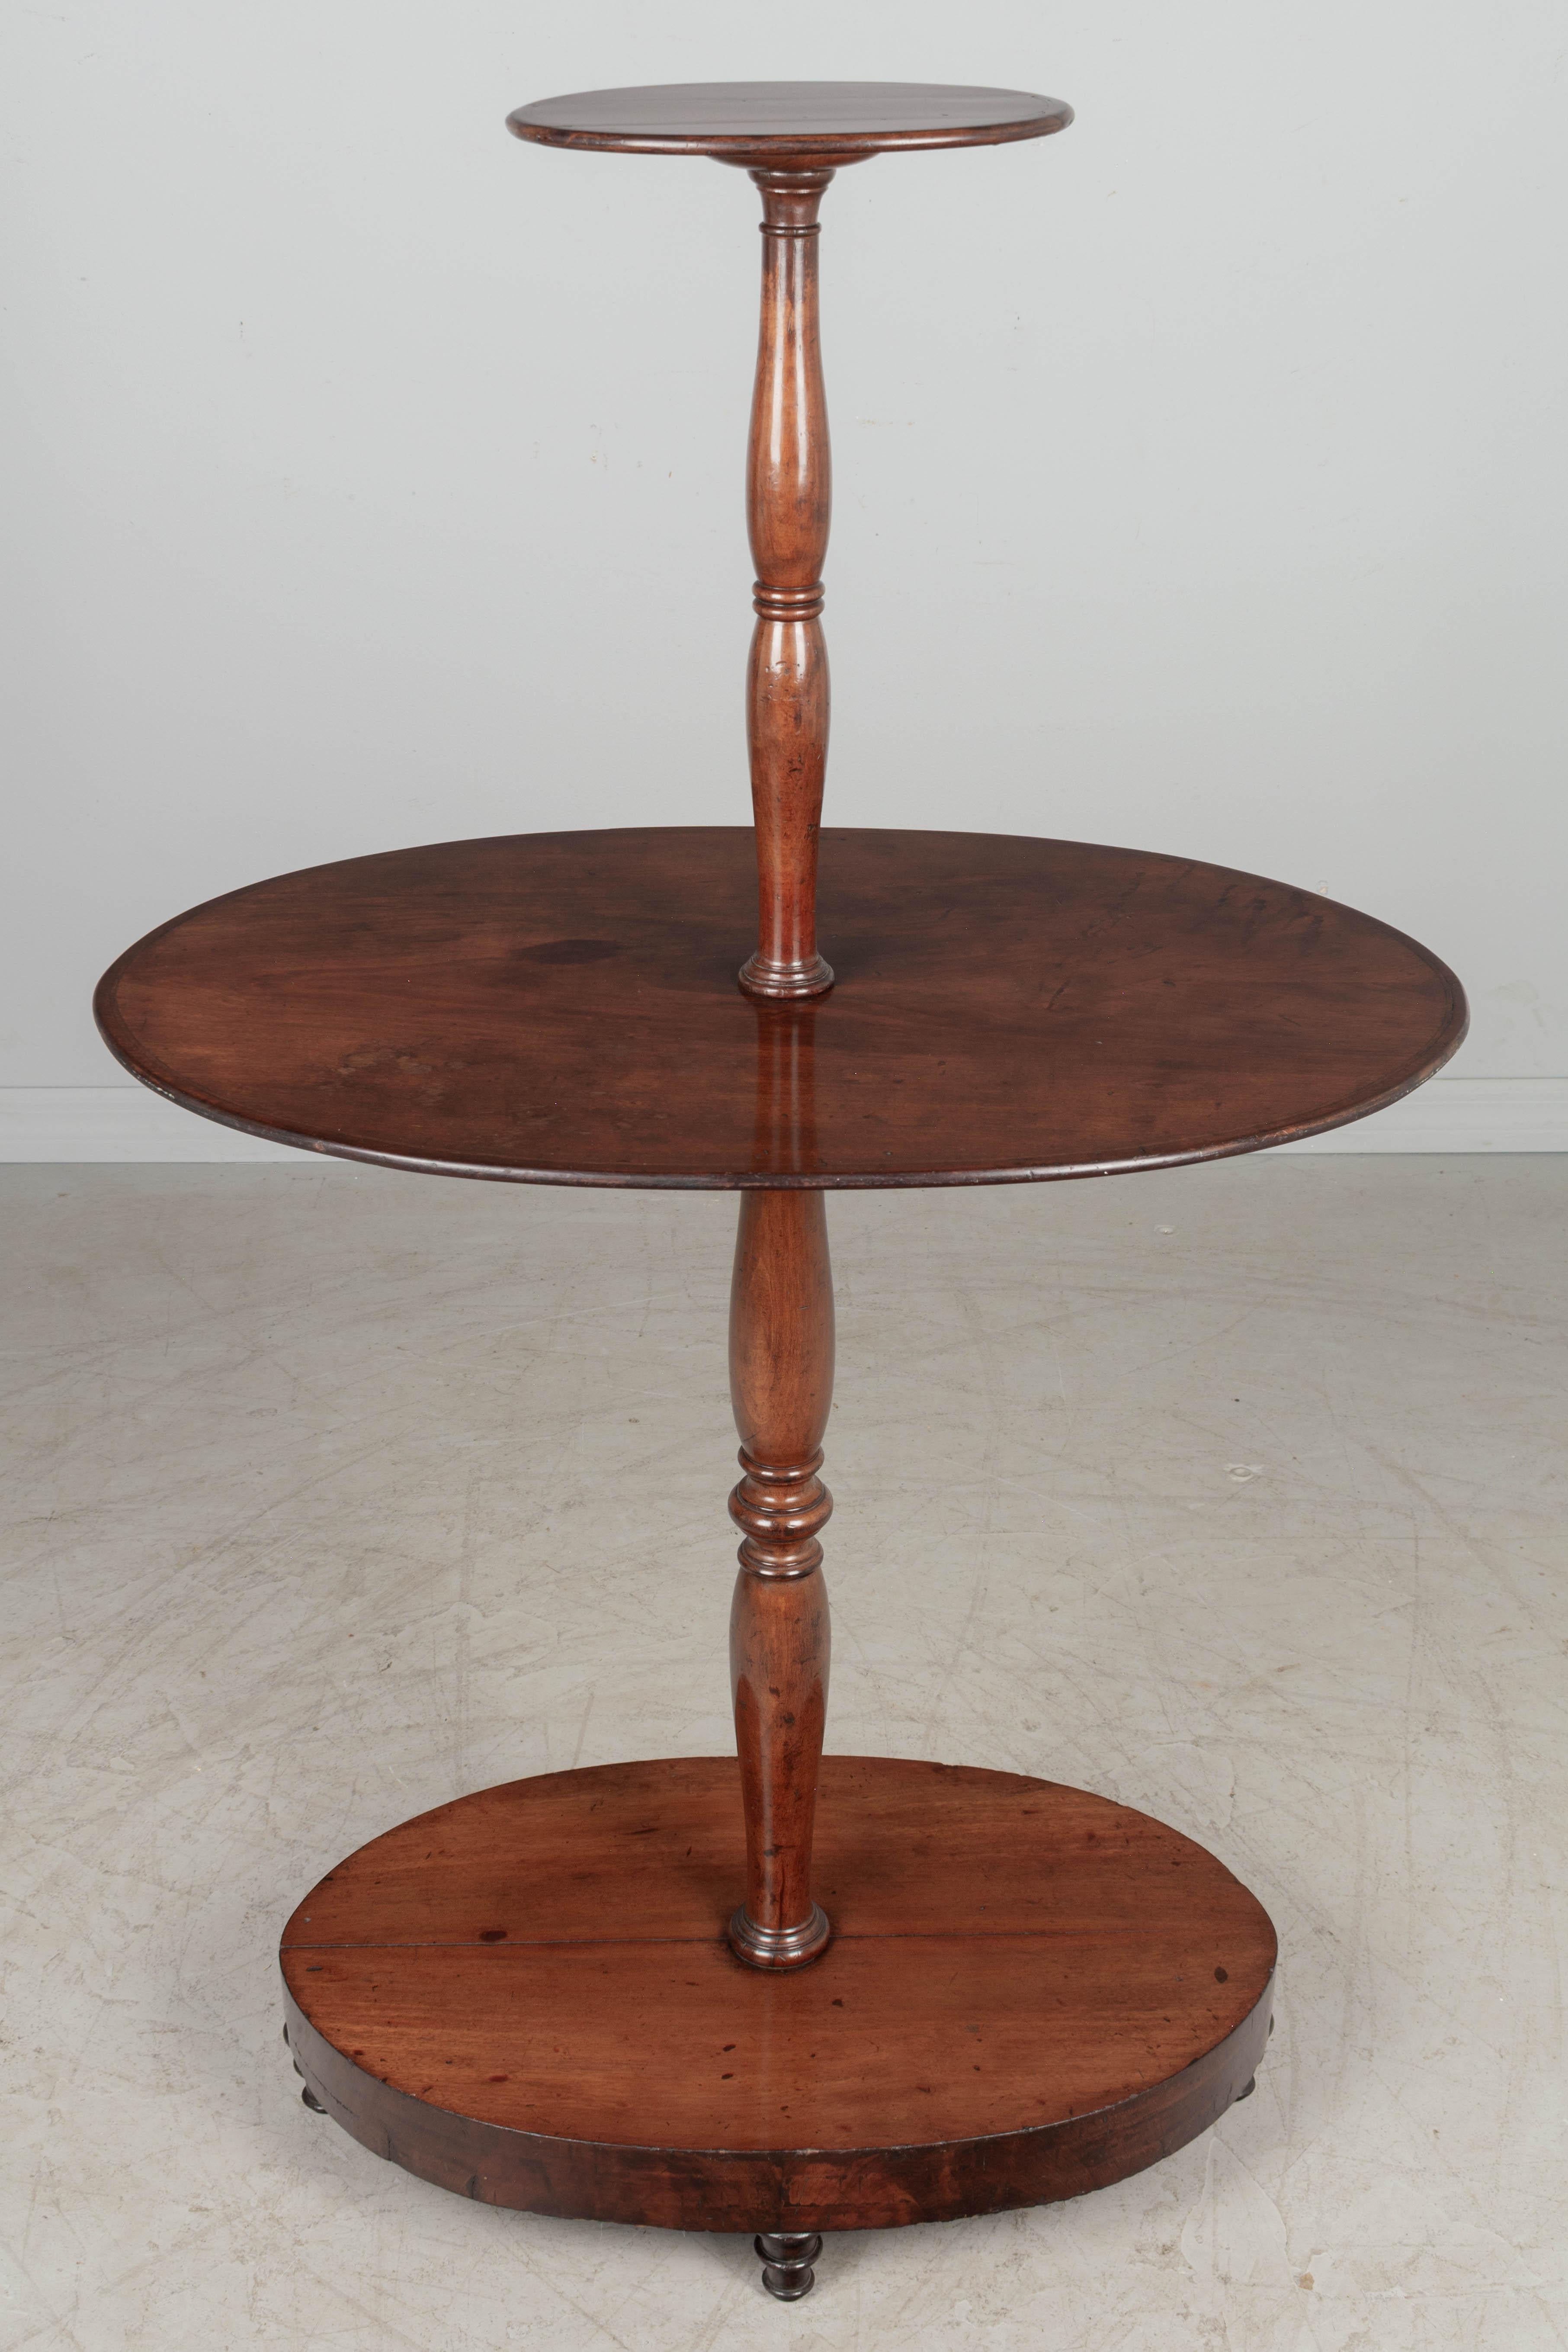 A late 19th century English mahogany oval tiered dumbwaiter or dessert server, with turned center pole. Oval base with mahogany veneer and turned feet. This table will be dismantled for shipping via white glove delivery. Circa 1880-1900. 
Overall